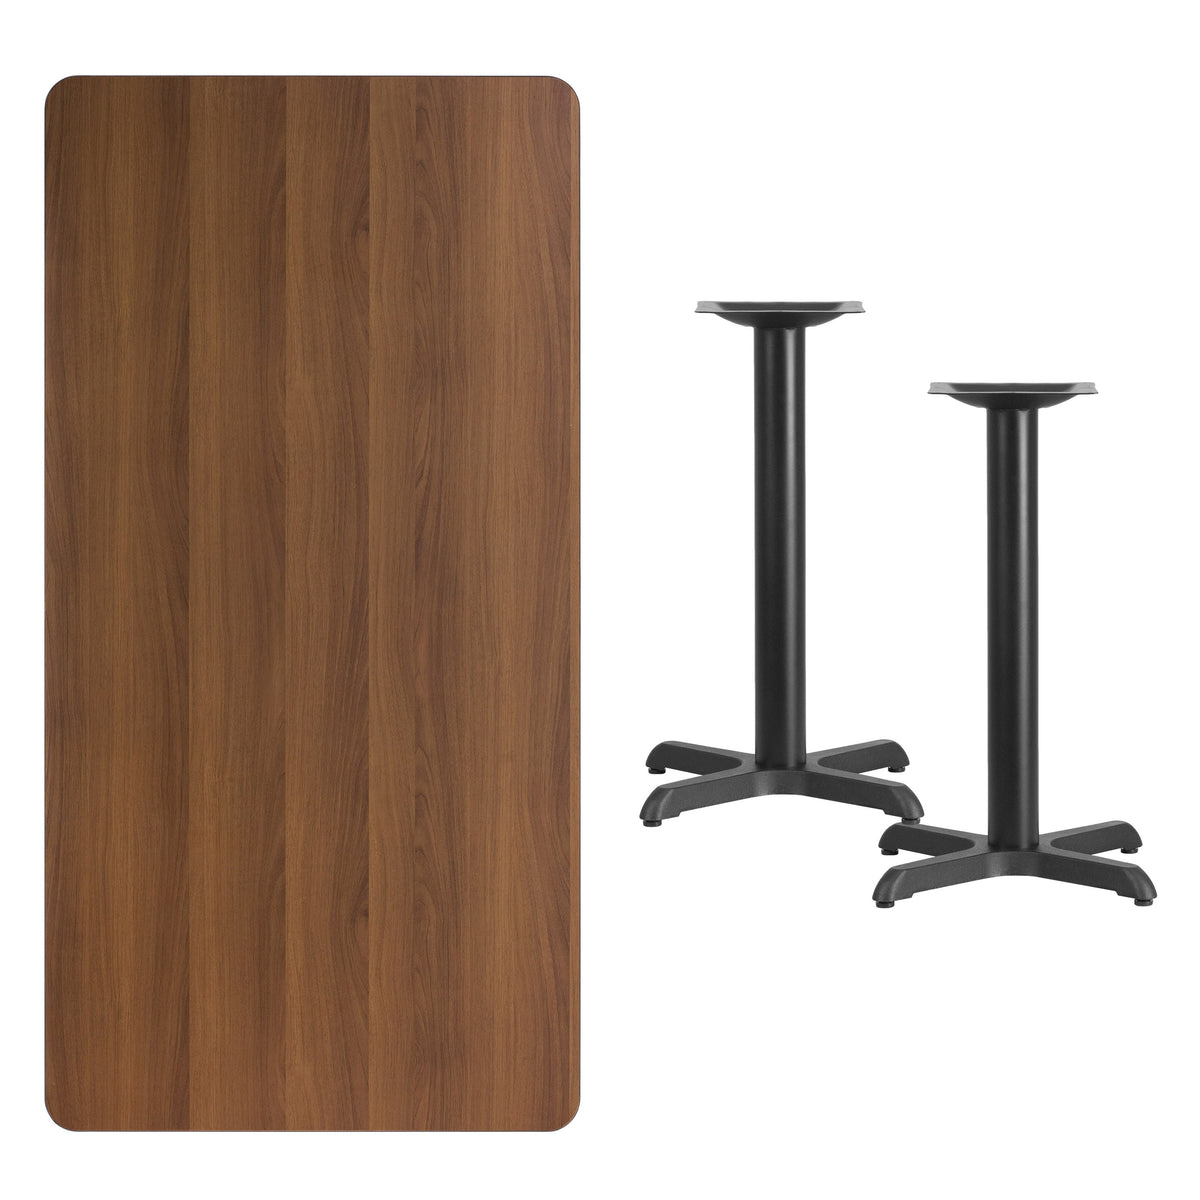 Walnut |#| 30inch x 60inch Rectangular Walnut Laminate Table Top & 22inch x 22inch Table Height Bases